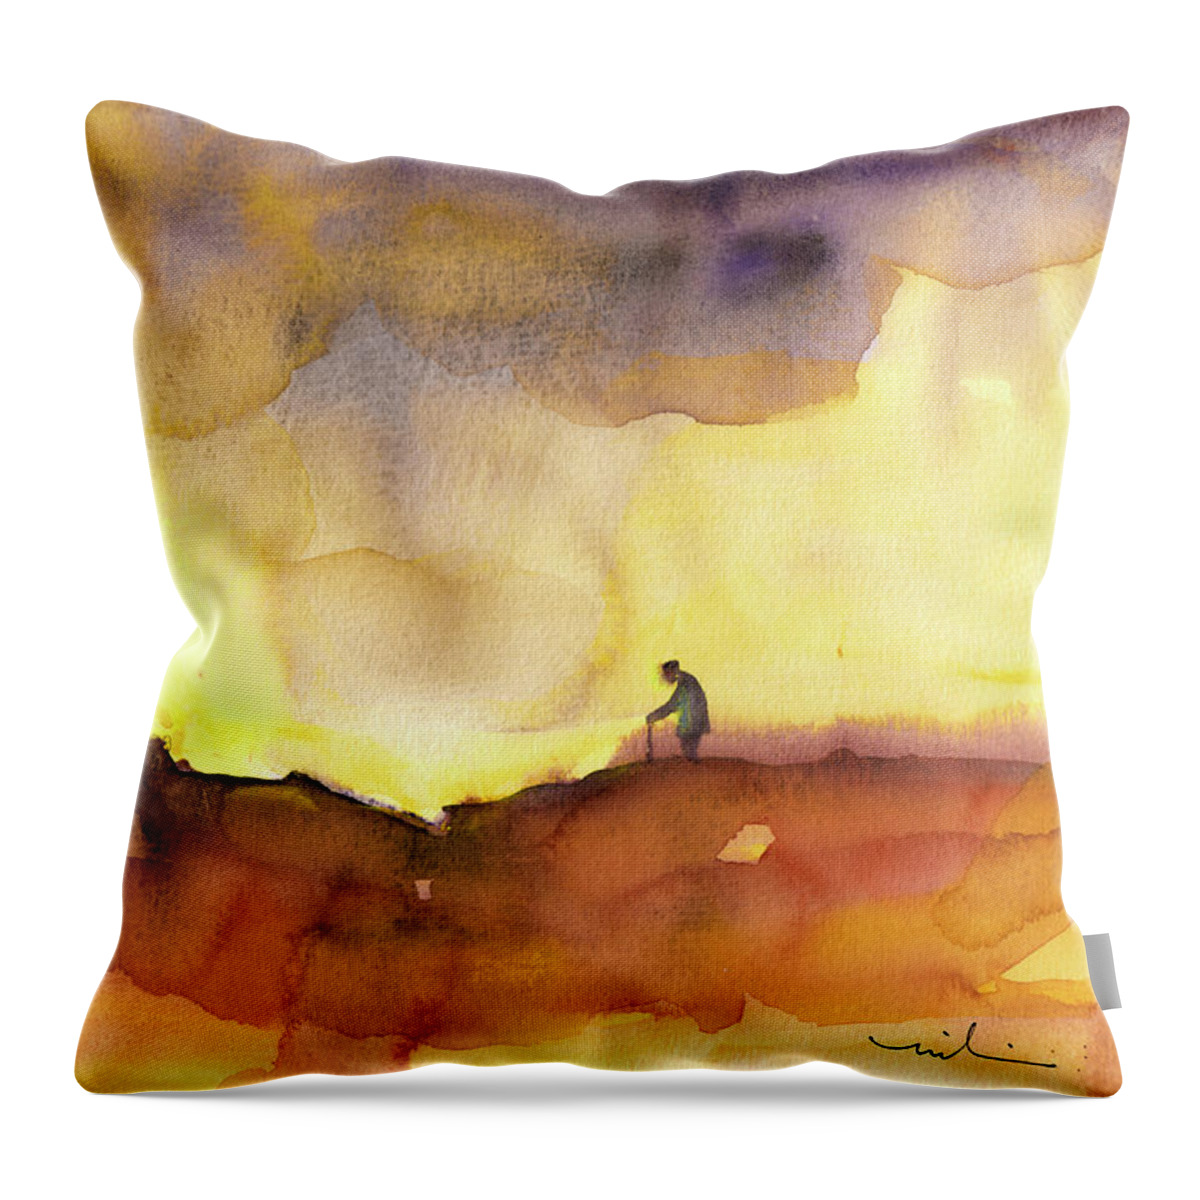 Watercolour Throw Pillow featuring the painting At The End Of The Way by Miki De Goodaboom